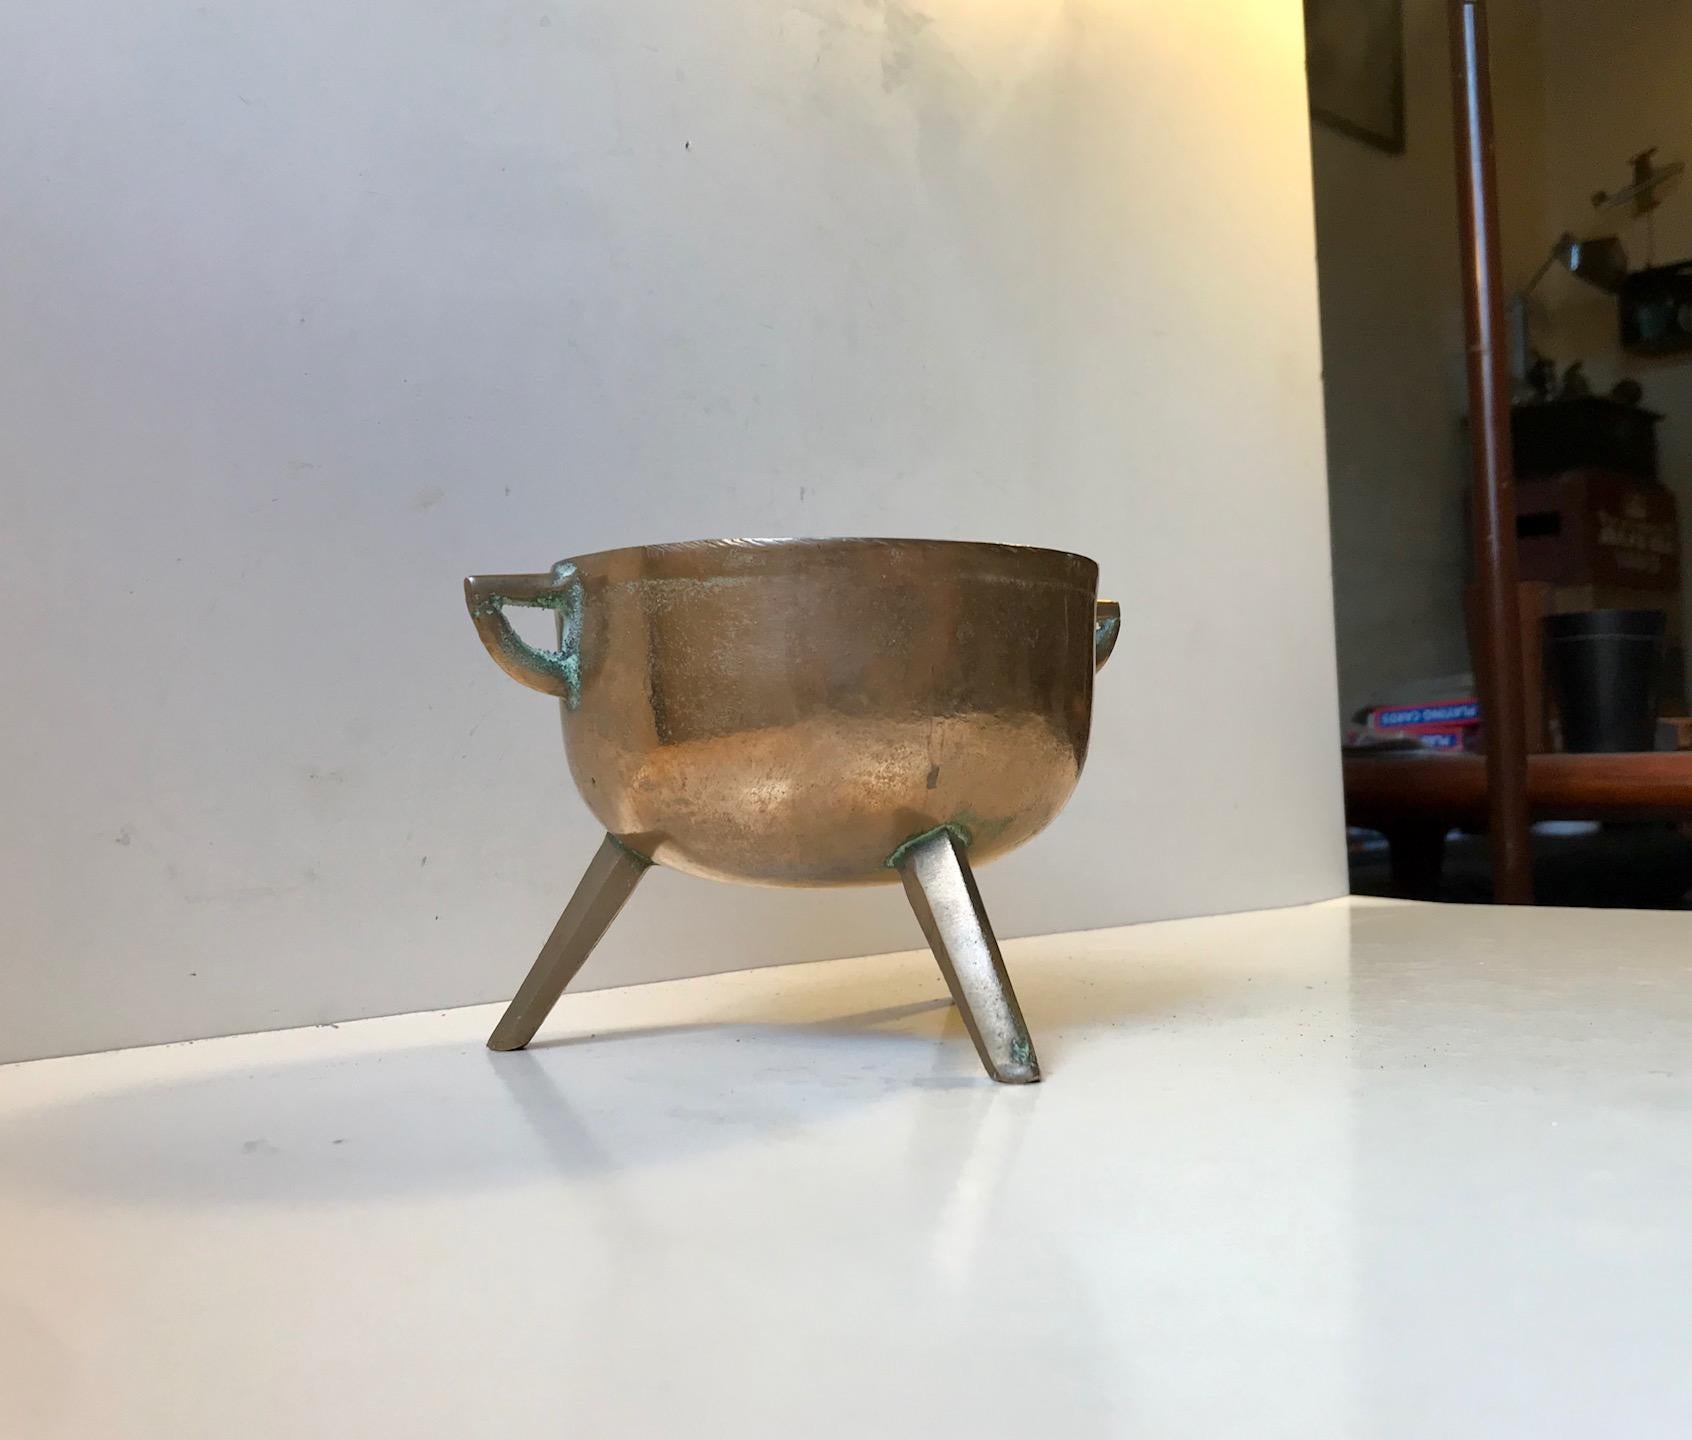 A small sized bronze cauldron. Medieval in style. Presumably continental. Age and precise origin unknown. Would make a great planter, incense burner or unusual decorative dish.